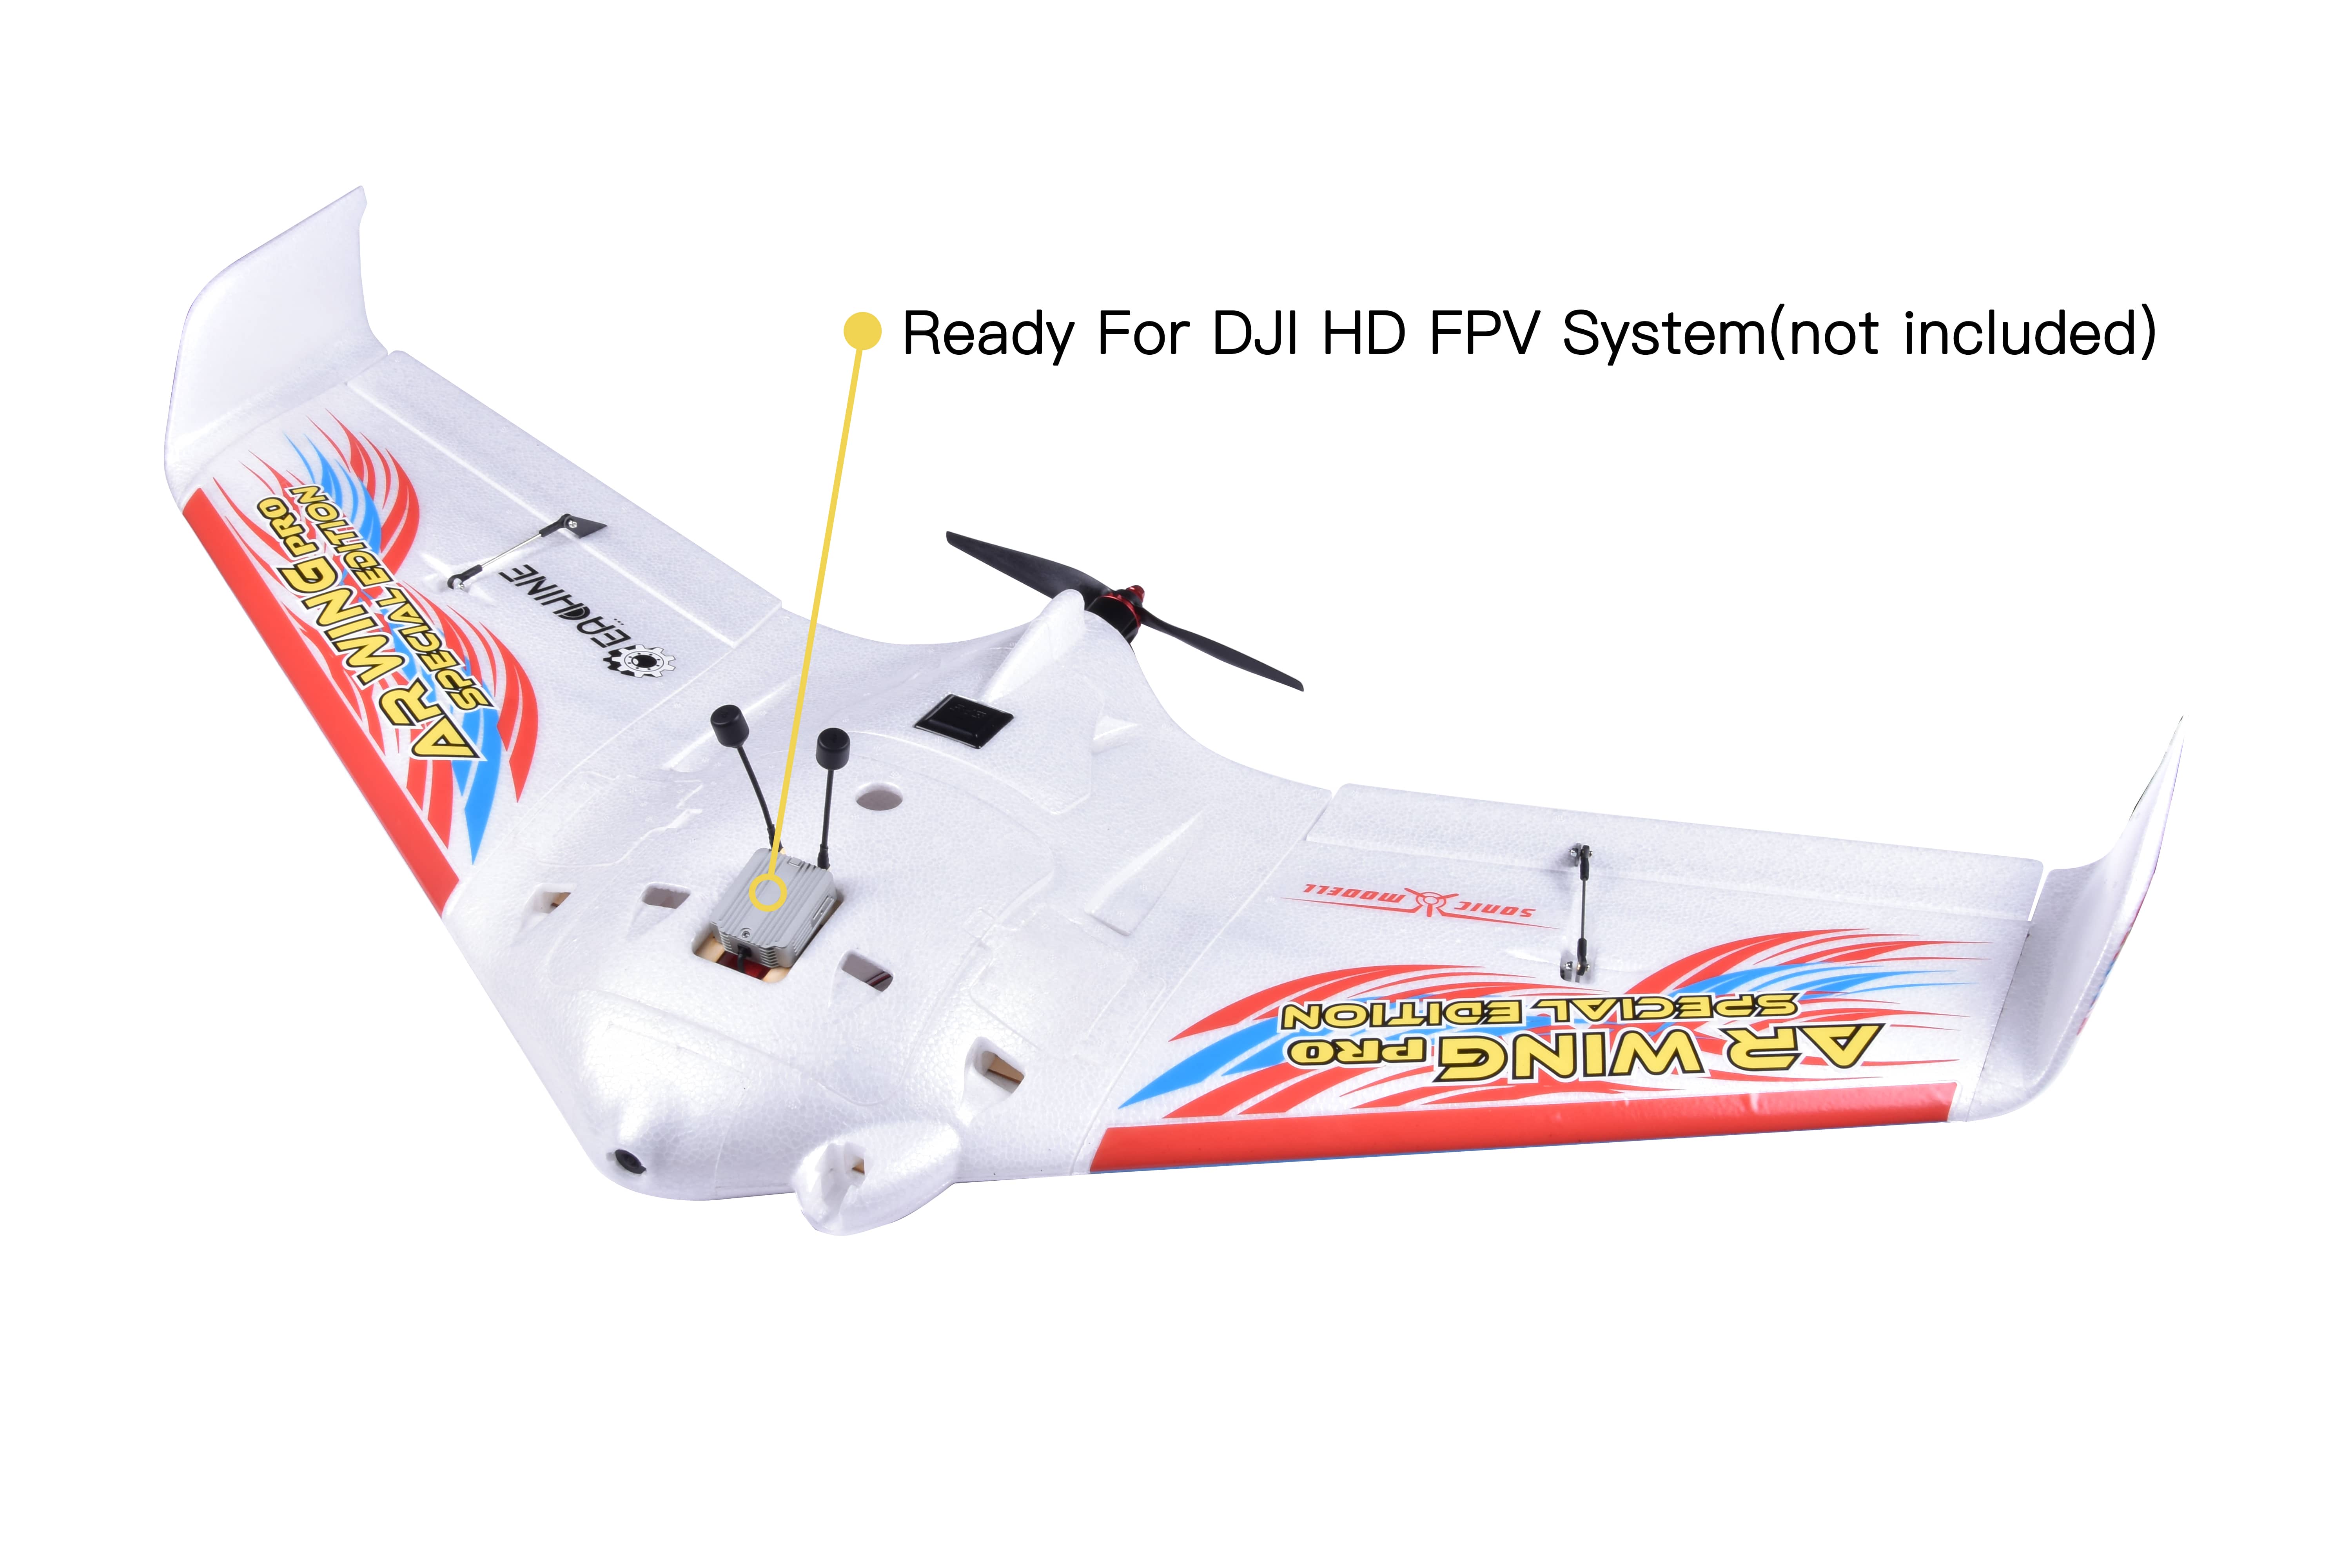 Eachine--Sonicmodell-AR-Wing-Pro-Special-Edition-1000mm-Wingspan-EPP-FPV-Flying-Wing-RC-Airplane-KIT-1857256-1